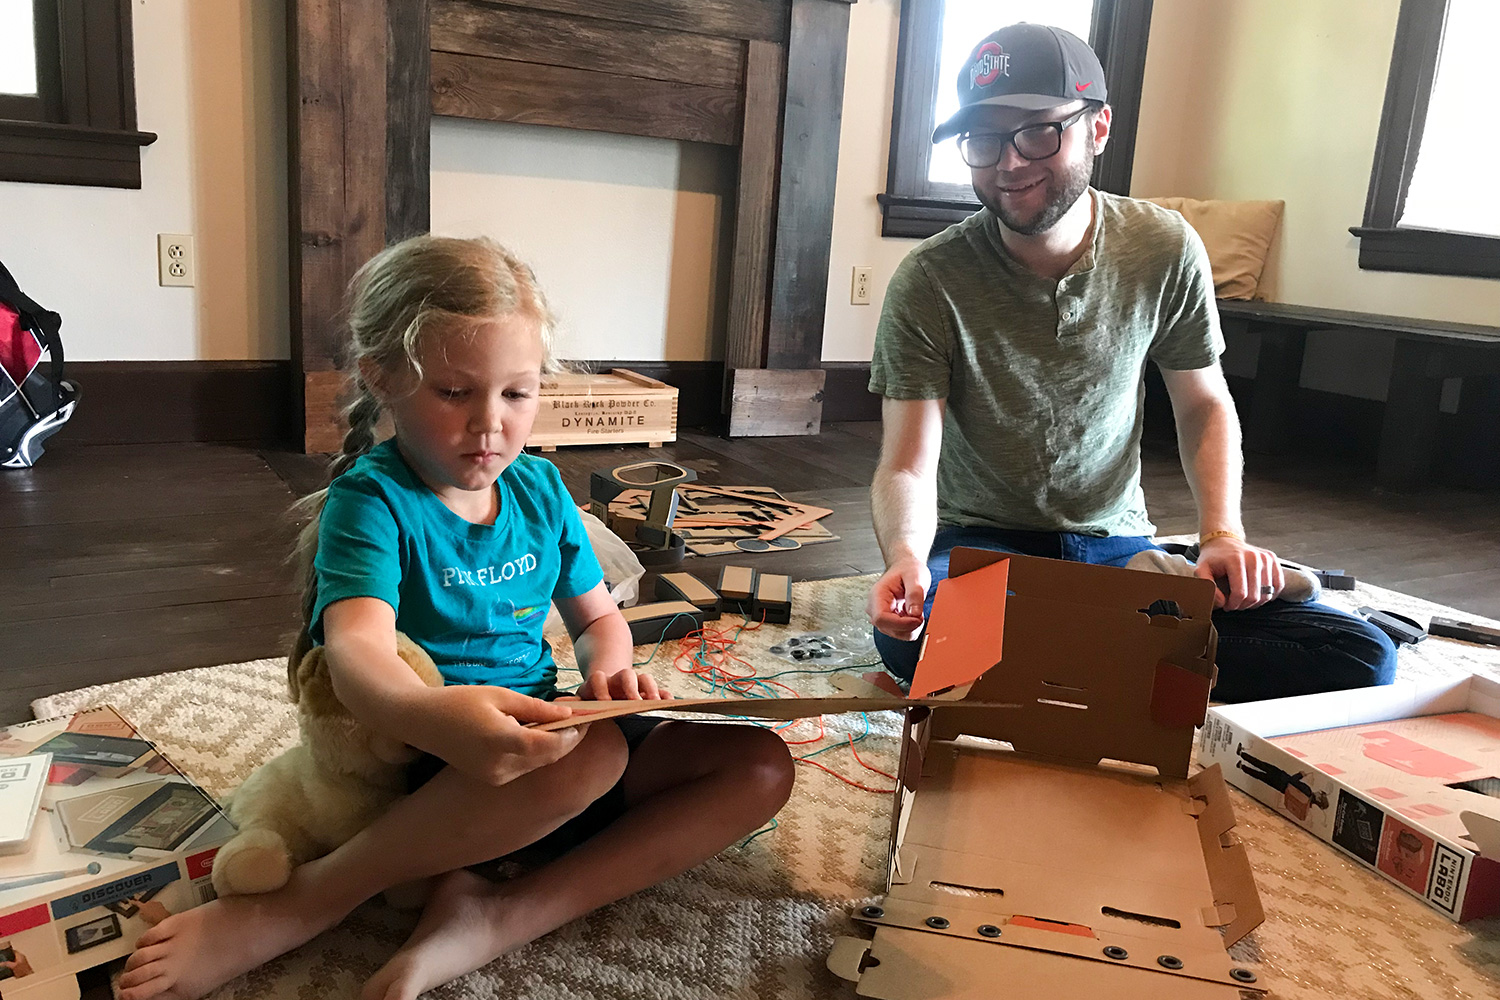 nintendo labo robot kit product experience review cardboard flat